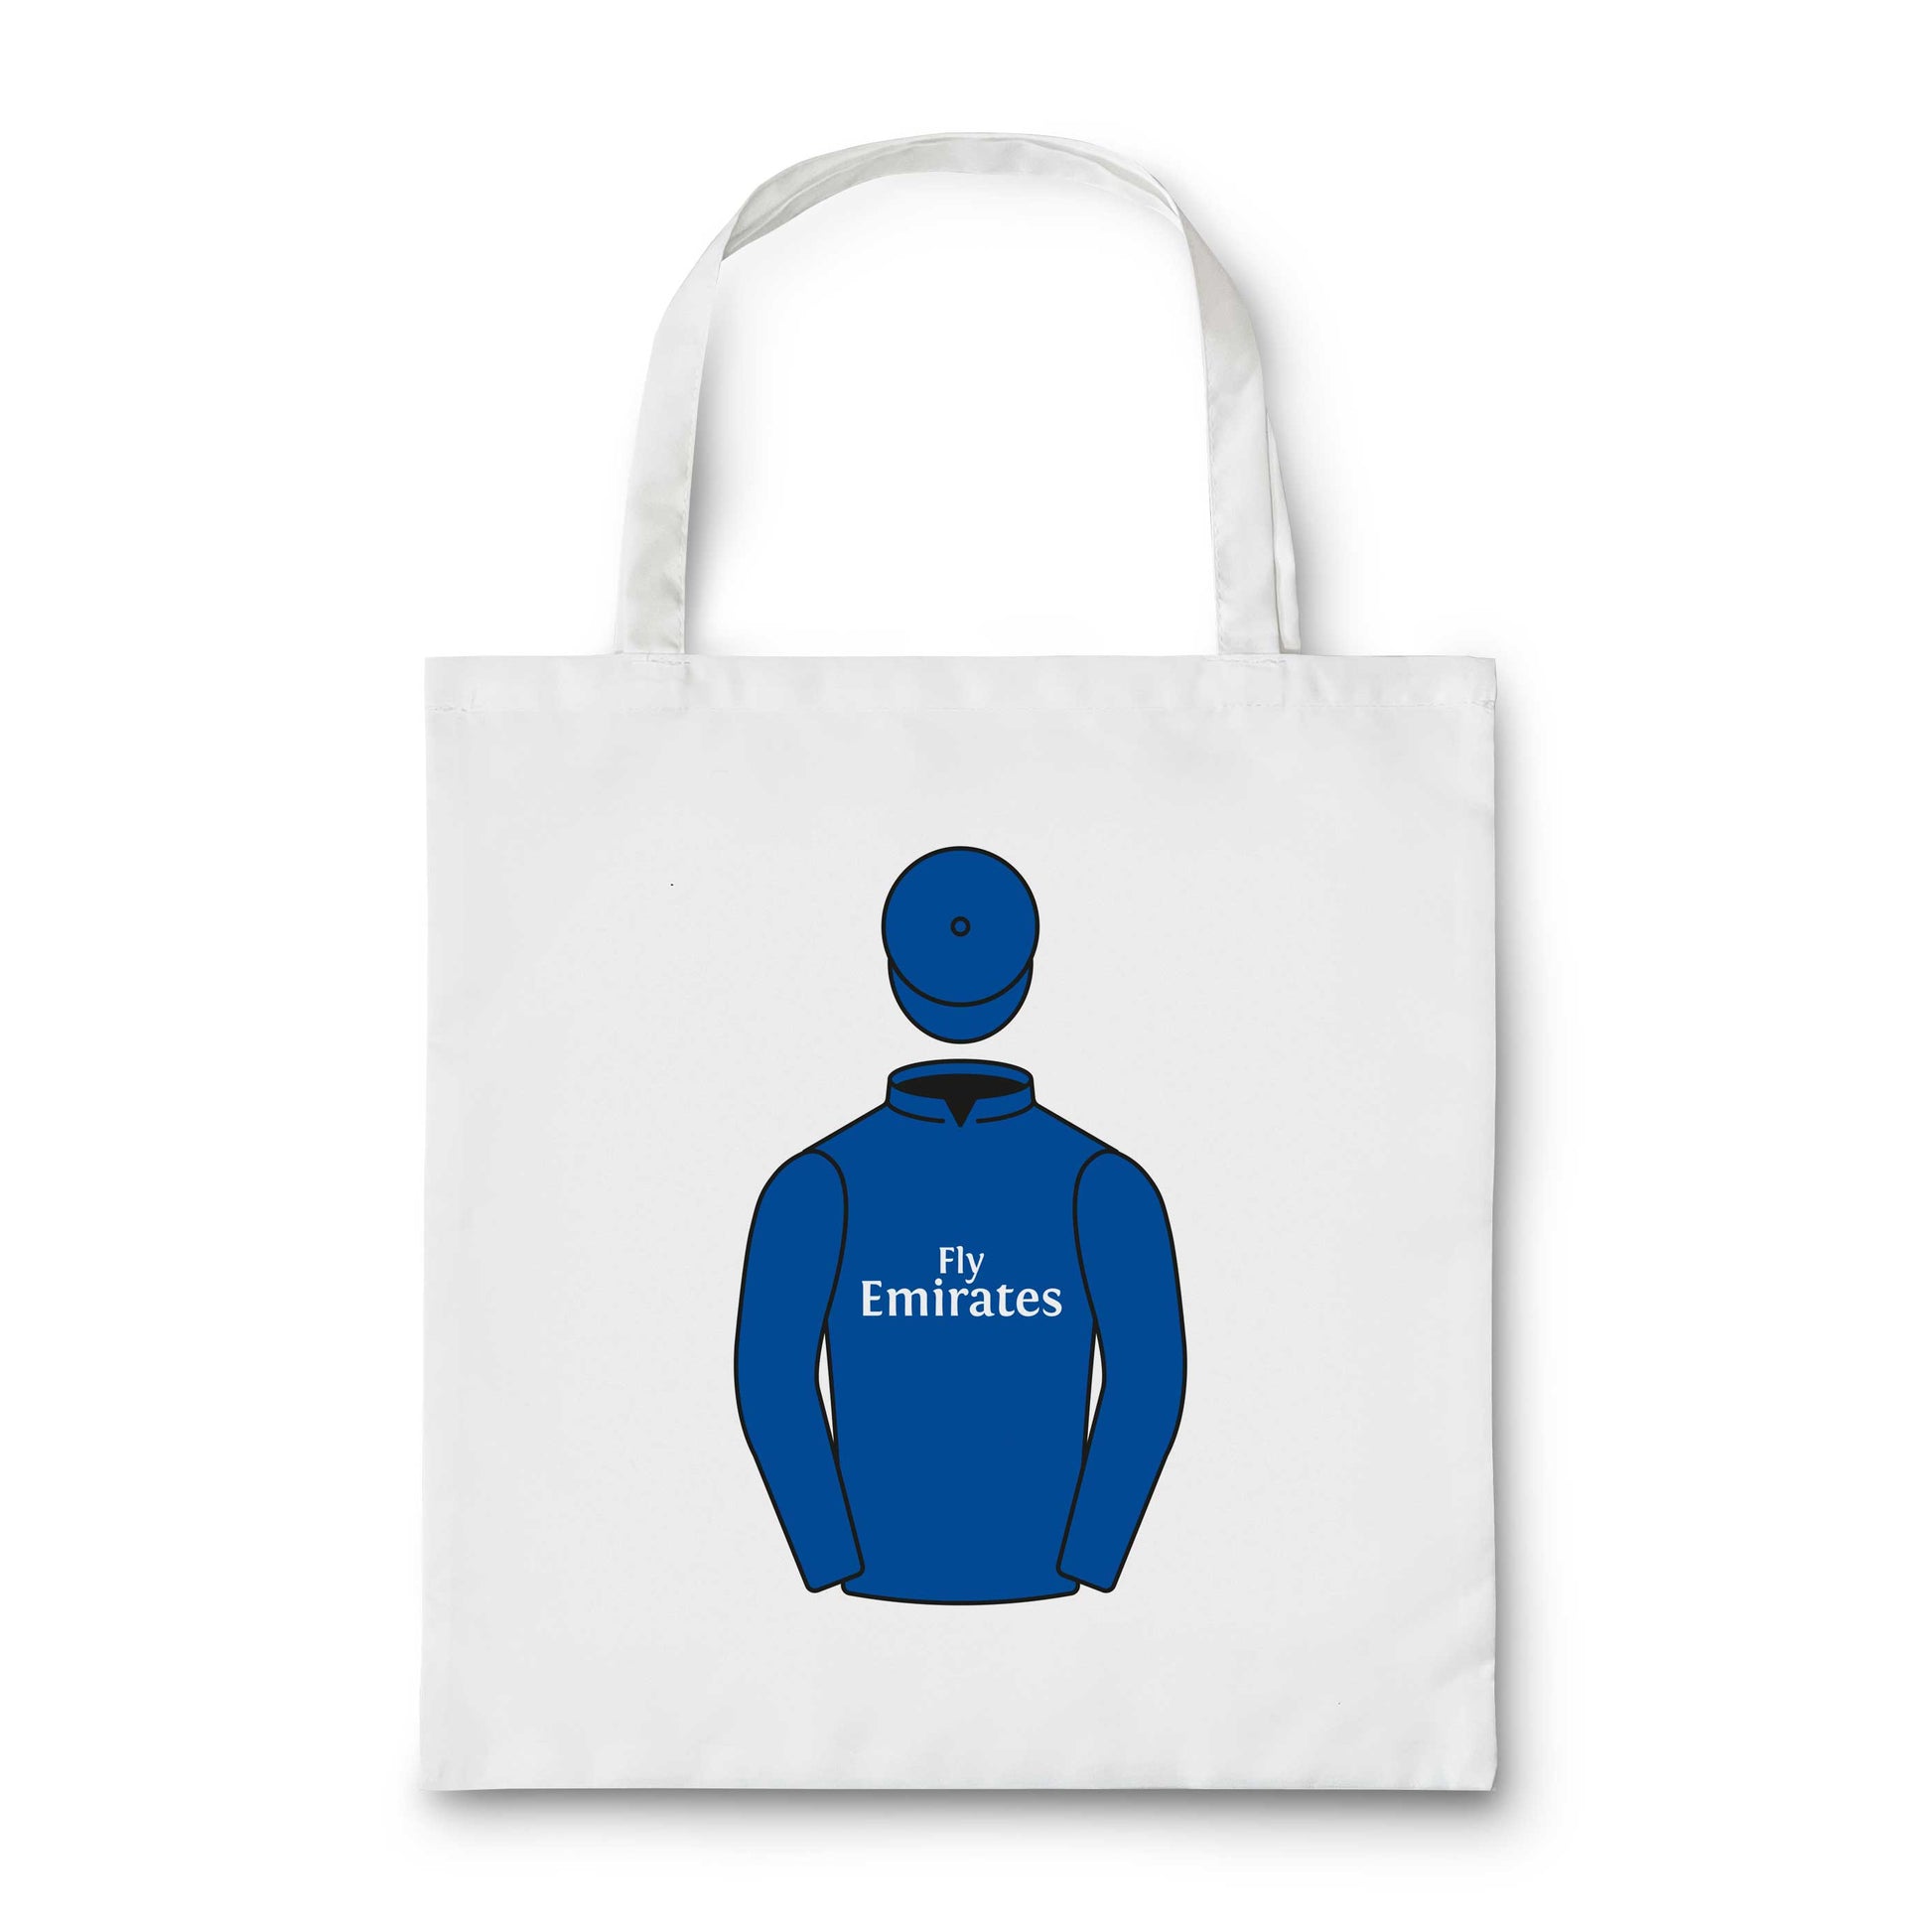 Godolphin Tote Bag - Tote Bag - Hacked Up